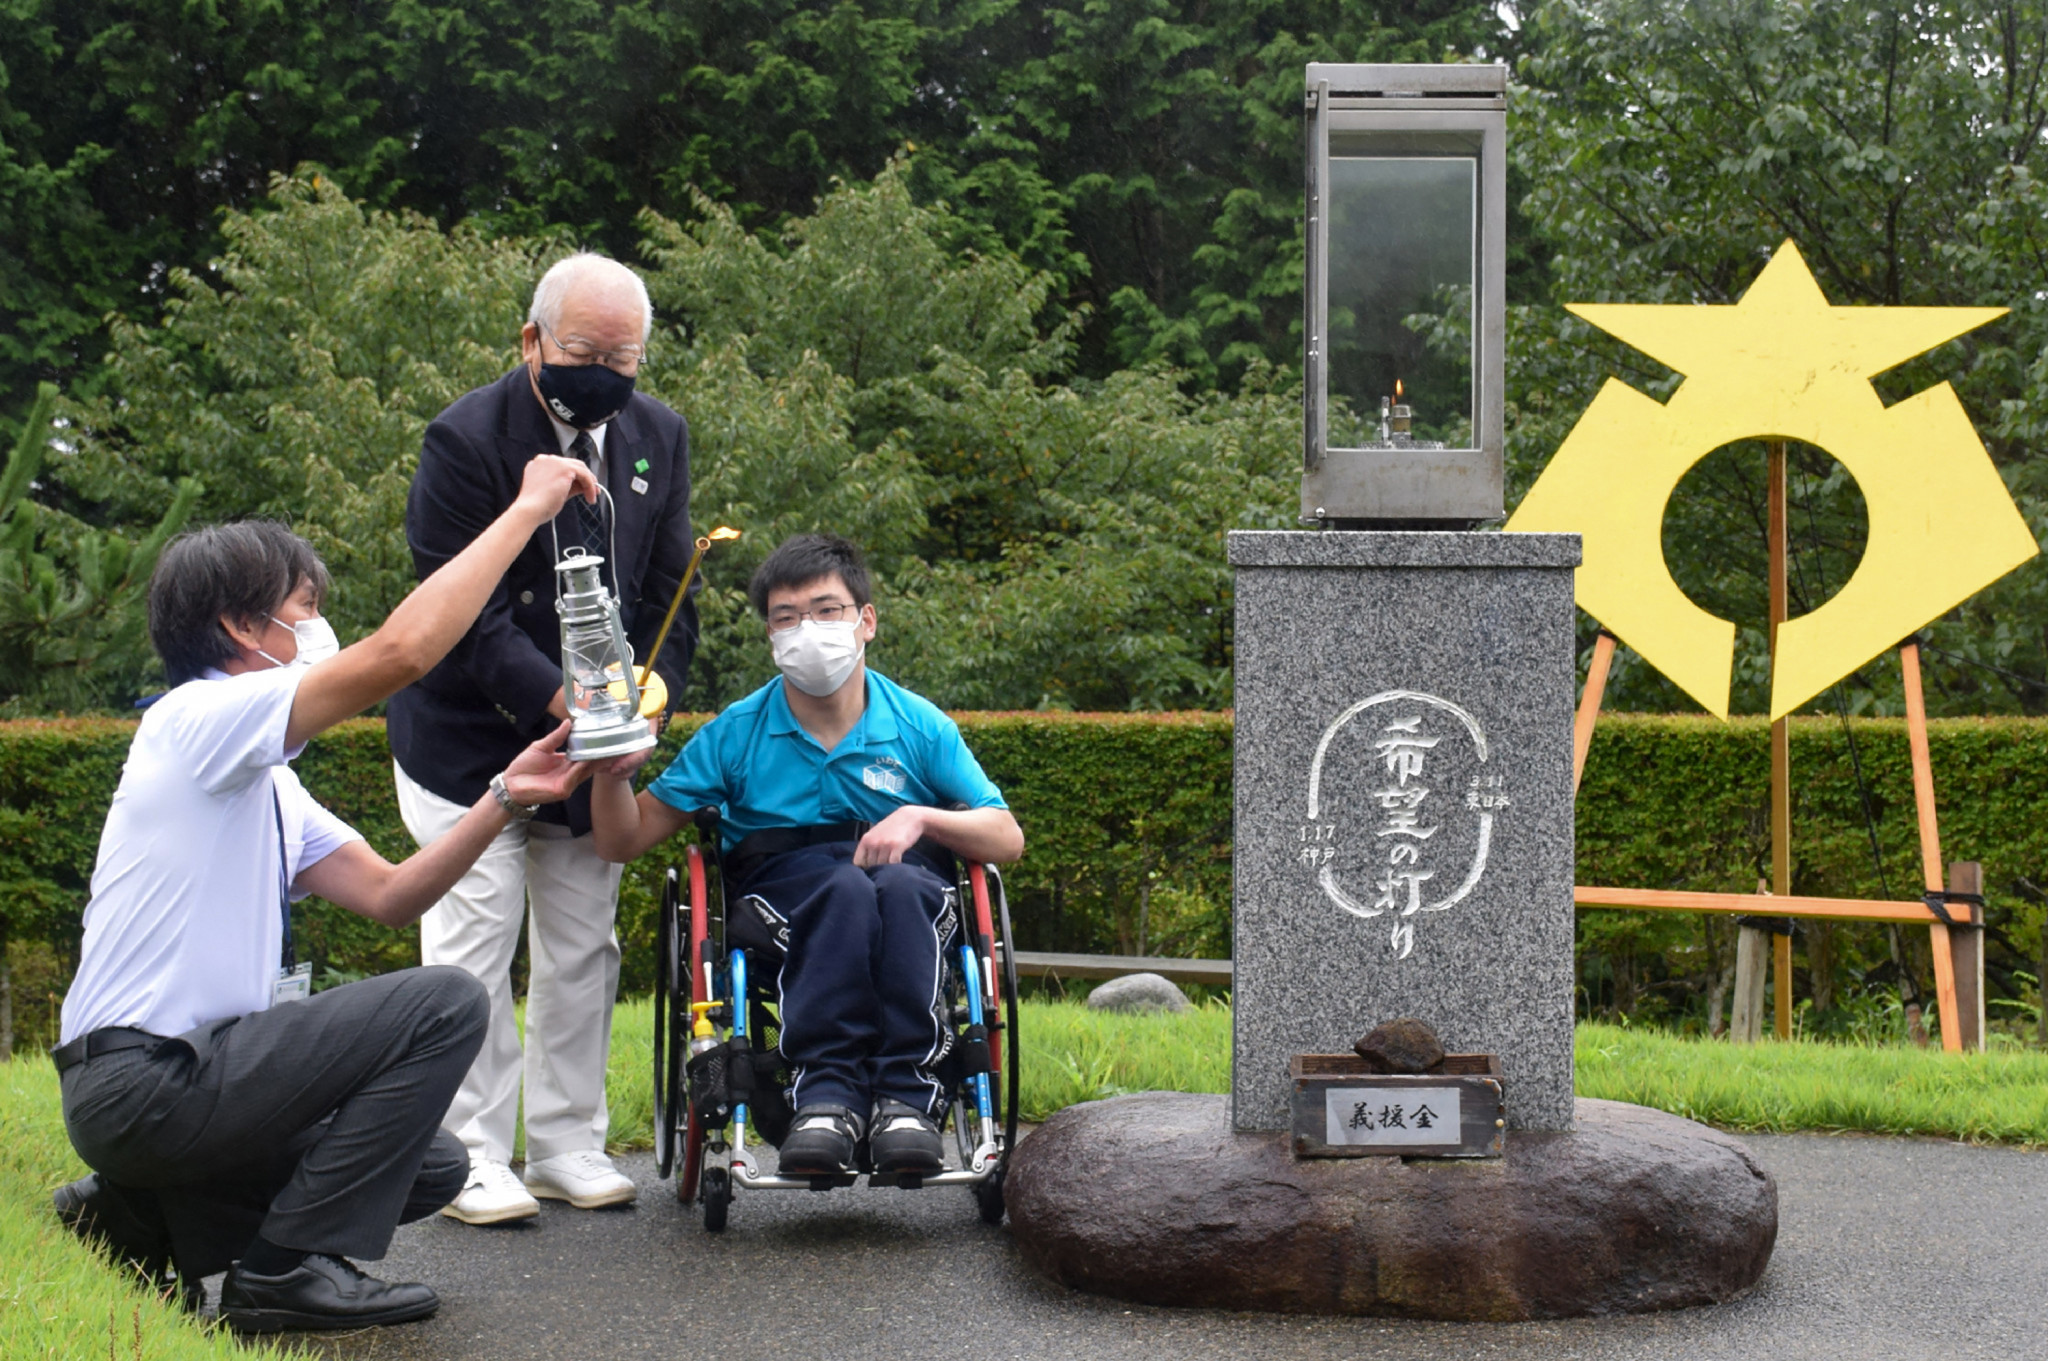 Paralympic Flames lit in Japan to mark beginning of Torch Relay